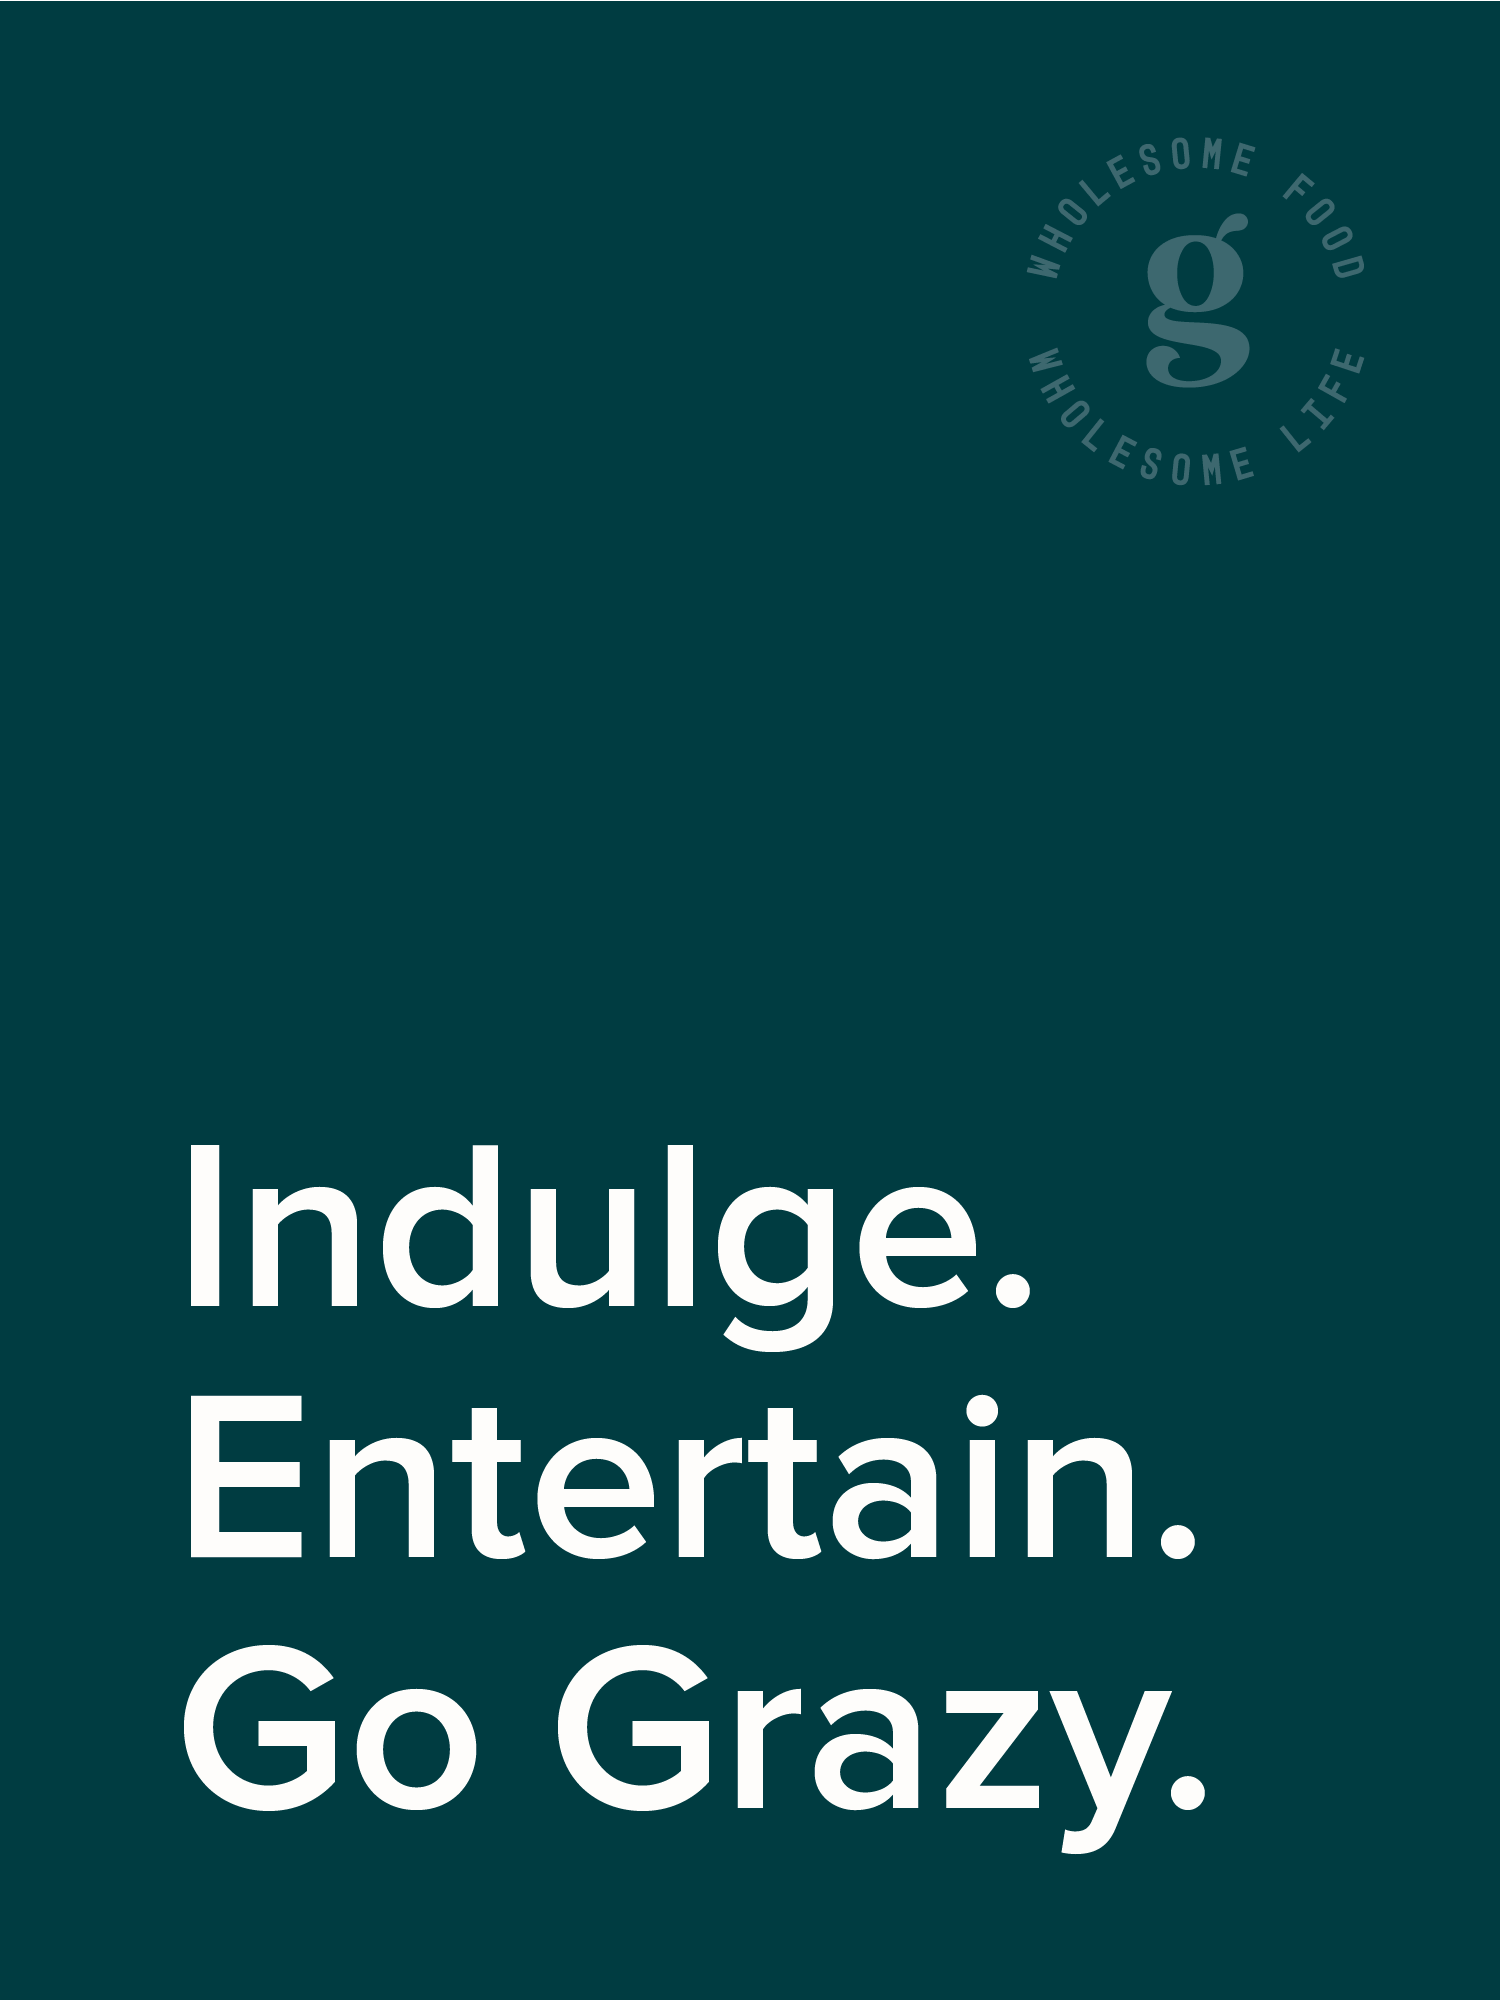 Bifold booklet cover that displays  'Indulge, Entertain. Go Grazy.' in white text on a teal background